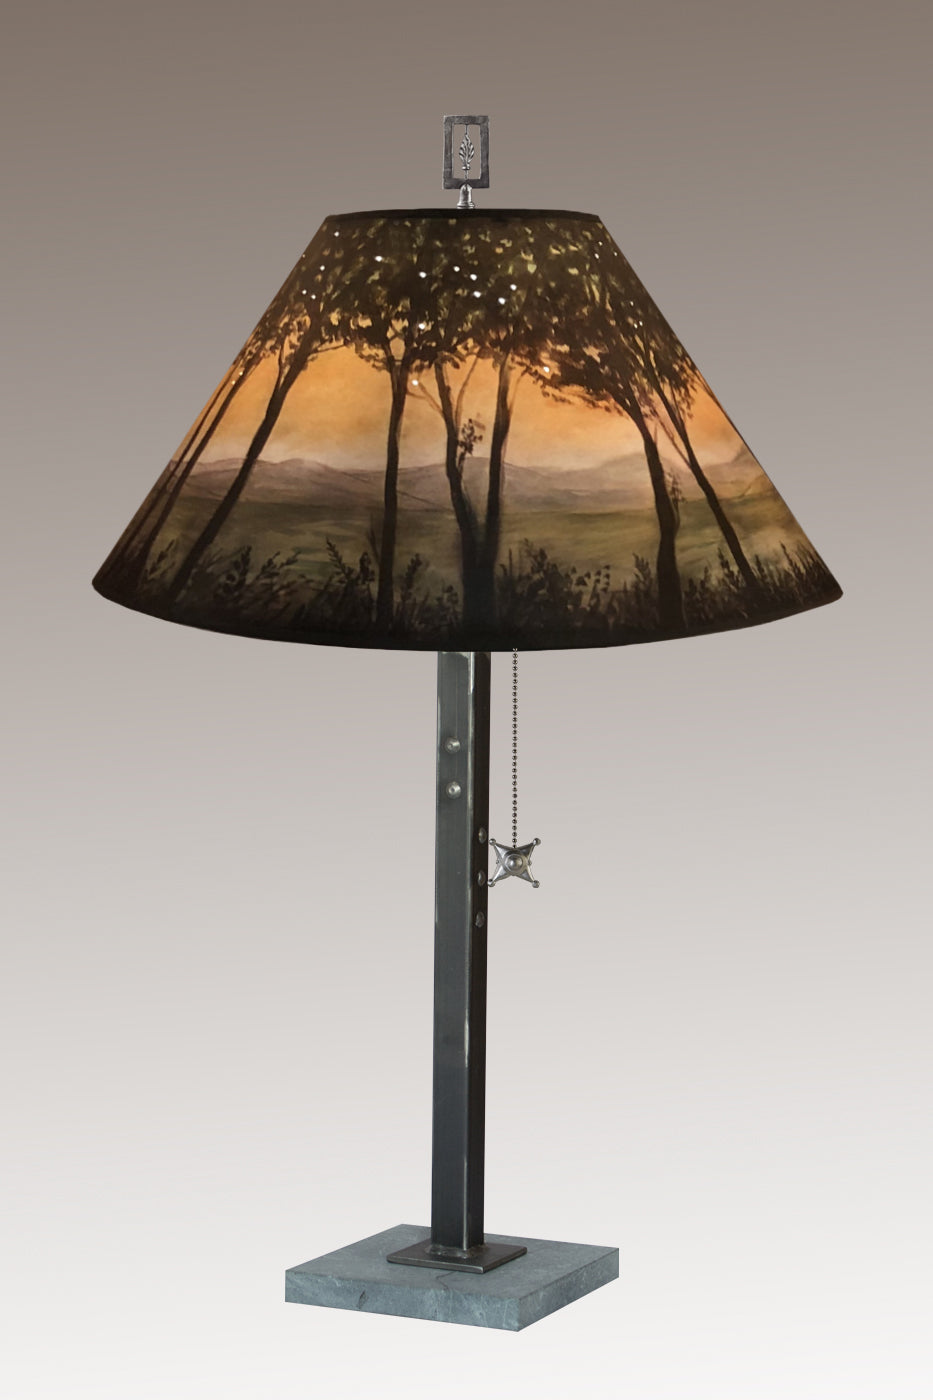 Janna Ugone & Co Table Lamps Steel Table Lamp with Large Conical Shade in Dawn